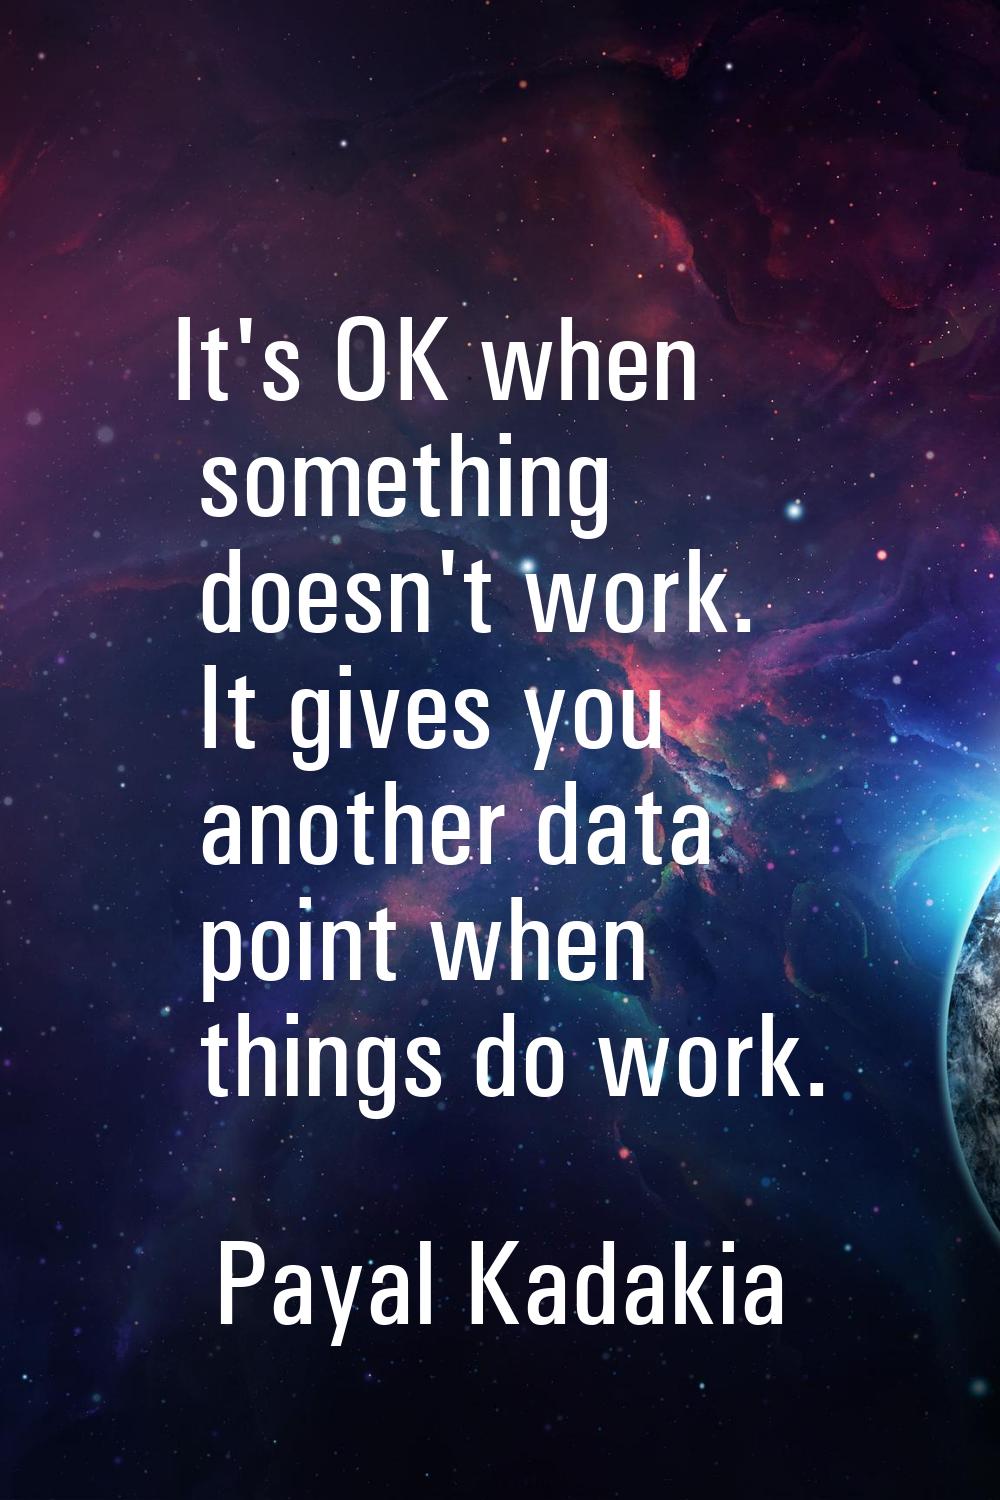 It's OK when something doesn't work. It gives you another data point when things do work.